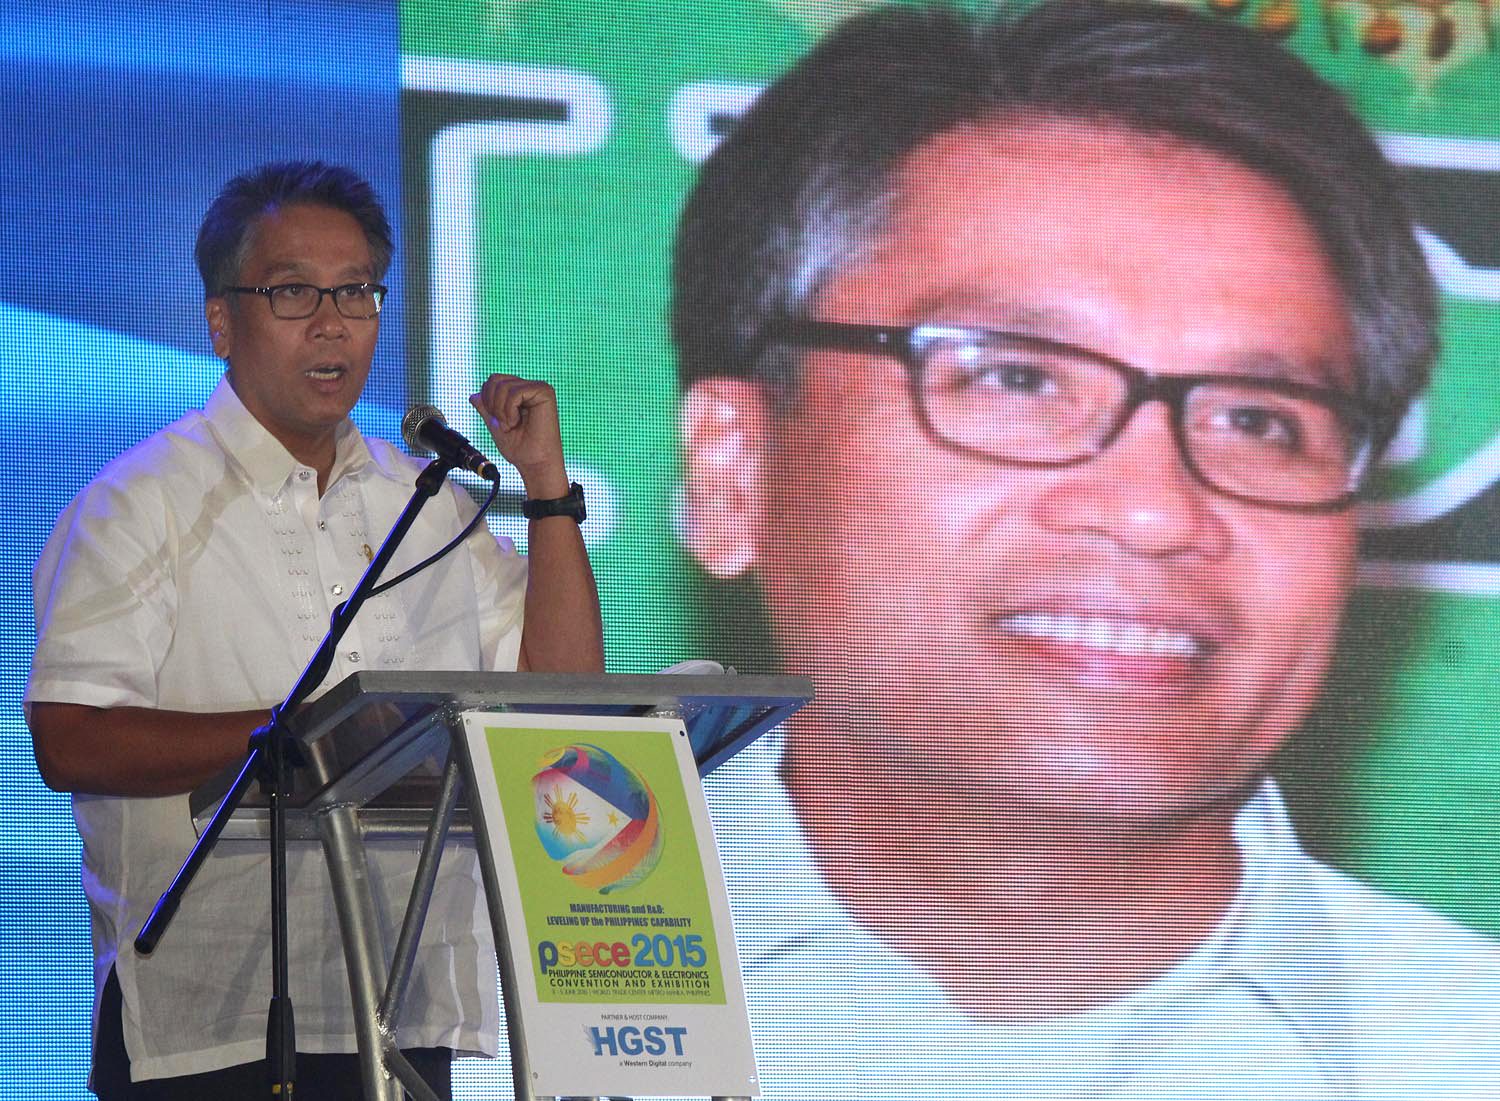 BEST DECISION.'The Philippines is the best business decision as location for electronics among neighboring countries, Interior Secretary Mar Roxas says at the 12th Philippine Semiconductor and Electronics Convention and Exhibition in Pasay City Wednesday, June 3, 2015. Photo by Joel Leporada/Rappler  